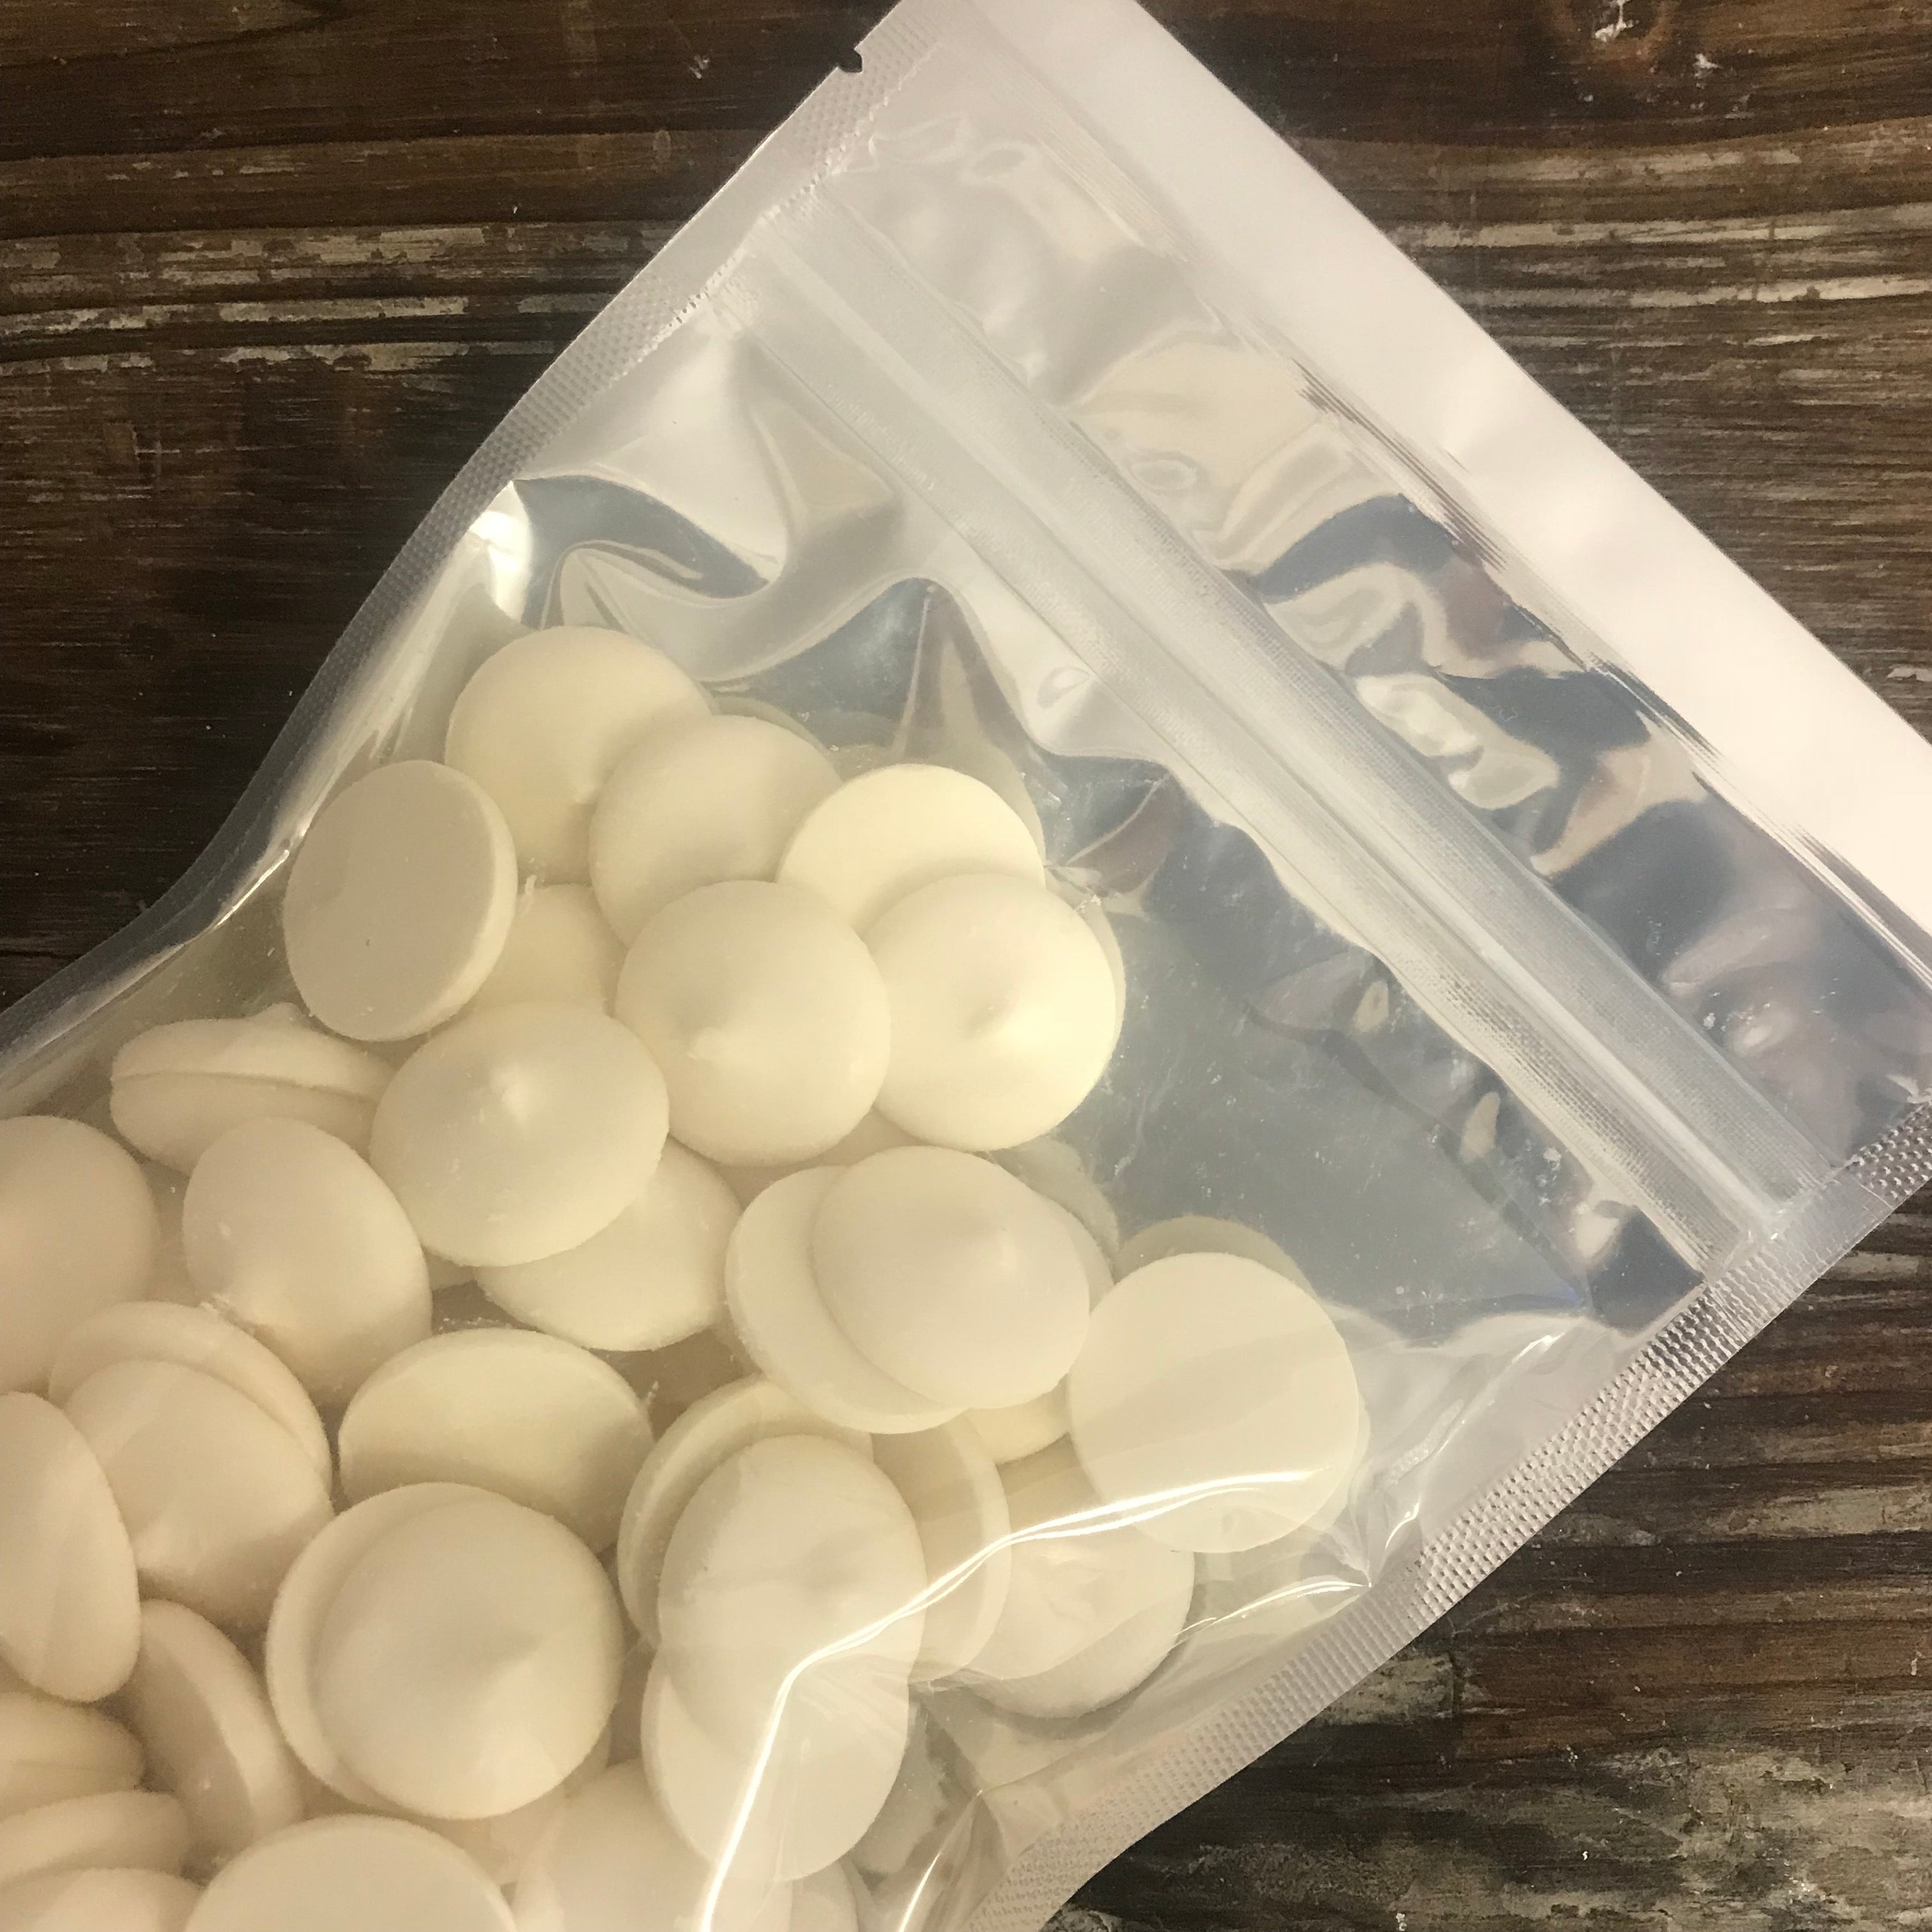 Guittard White Vanilla Flavored Candy Coating Wafers - 1 lb